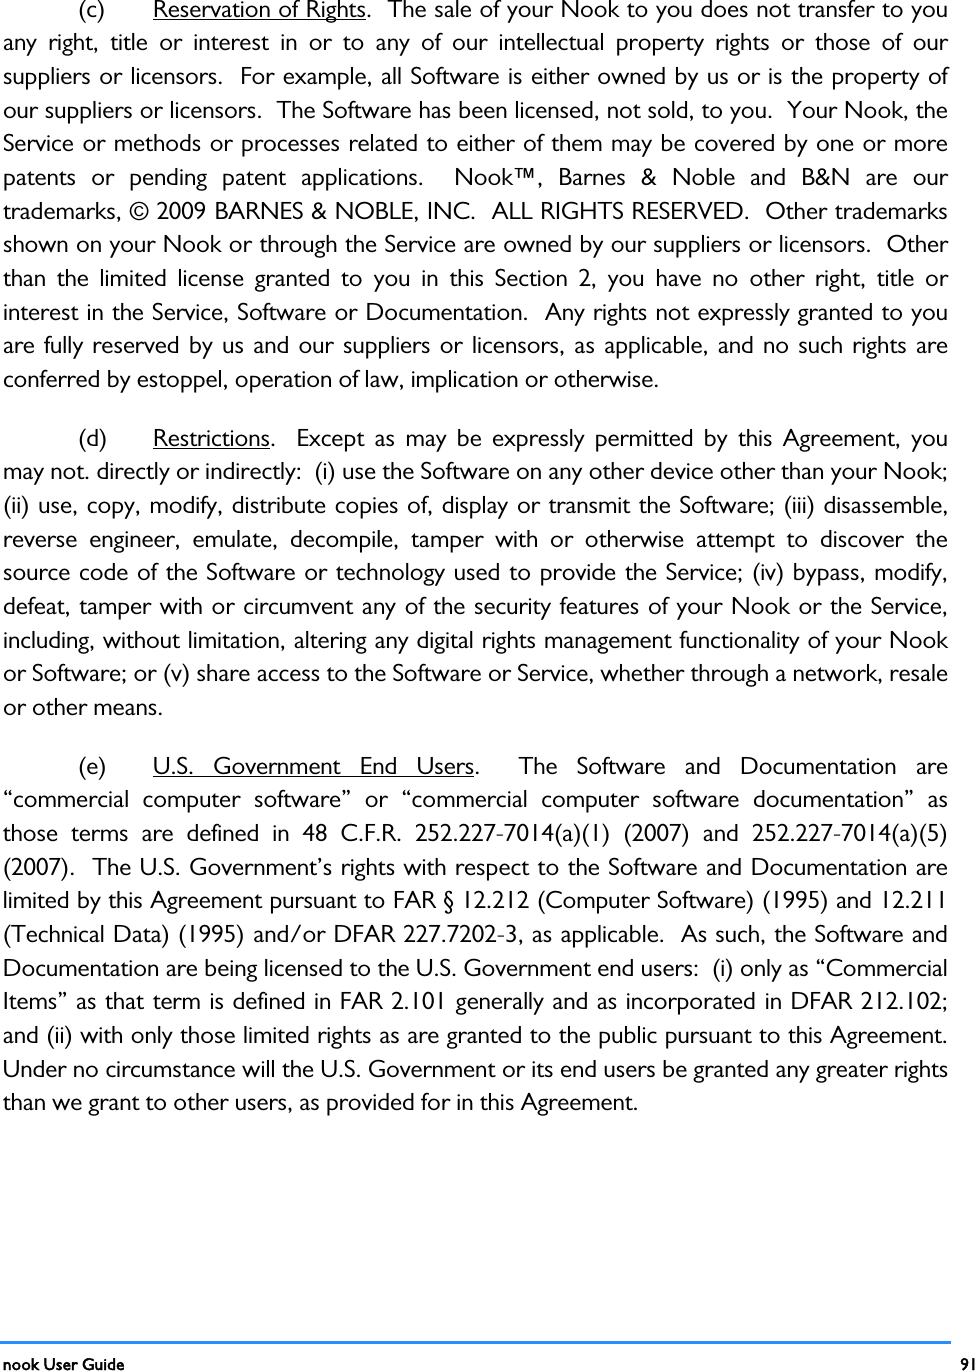  nook User Guide    91        (c) Reservation of Rights.  The sale of your Nook to you does not transfer to you any right, title or interest in or to any of our intellectual property rights or those of our suppliers or licensors.  For example, all Software is either owned by us or is the property of our suppliers or licensors.  The Software has been licensed, not sold, to you.  Your Nook, the Service or methods or processes related to either of them may be covered by one or more patents or pending patent applications.  Nook™, Barnes &amp; Noble and B&amp;N are our trademarks, © 2009 BARNES &amp; NOBLE, INC.  ALL RIGHTS RESERVED.  Other trademarks shown on your Nook or through the Service are owned by our suppliers or licensors.  Other than the limited license granted to you in this Section 2, you have no other right, title or interest in the Service, Software or Documentation.  Any rights not expressly granted to you are fully reserved by us and our suppliers or licensors, as applicable, and no such rights are conferred by estoppel, operation of law, implication or otherwise.   (d) Restrictions.  Except as may be expressly permitted by this Agreement, you may not. directly or indirectly:  (i) use the Software on any other device other than your Nook; (ii) use, copy, modify, distribute copies of, display or transmit the Software; (iii) disassemble, reverse engineer, emulate, decompile, tamper with or otherwise attempt to discover the source code of the Software or technology used to provide the Service; (iv) bypass, modify, defeat, tamper with or circumvent any of the security features of your Nook or the Service, including, without limitation, altering any digital rights management functionality of your Nook or Software; or (v) share access to the Software or Service, whether through a network, resale or other means.   (e) U.S. Government End Users.  The Software and Documentation are “commercial computer software” or “commercial computer software documentation” as those terms are defined in 48 C.F.R. 252.227-7014(a)(1) (2007) and 252.227-7014(a)(5) (2007).  The U.S. Government’s rights with respect to the Software and Documentation are limited by this Agreement pursuant to FAR § 12.212 (Computer Software) (1995) and 12.211 (Technical Data) (1995) and/or DFAR 227.7202-3, as applicable.  As such, the Software and Documentation are being licensed to the U.S. Government end users:  (i) only as “Commercial Items” as that term is defined in FAR 2.101 generally and as incorporated in DFAR 212.102; and (ii) with only those limited rights as are granted to the public pursuant to this Agreement.  Under no circumstance will the U.S. Government or its end users be granted any greater rights than we grant to other users, as provided for in this Agreement. 